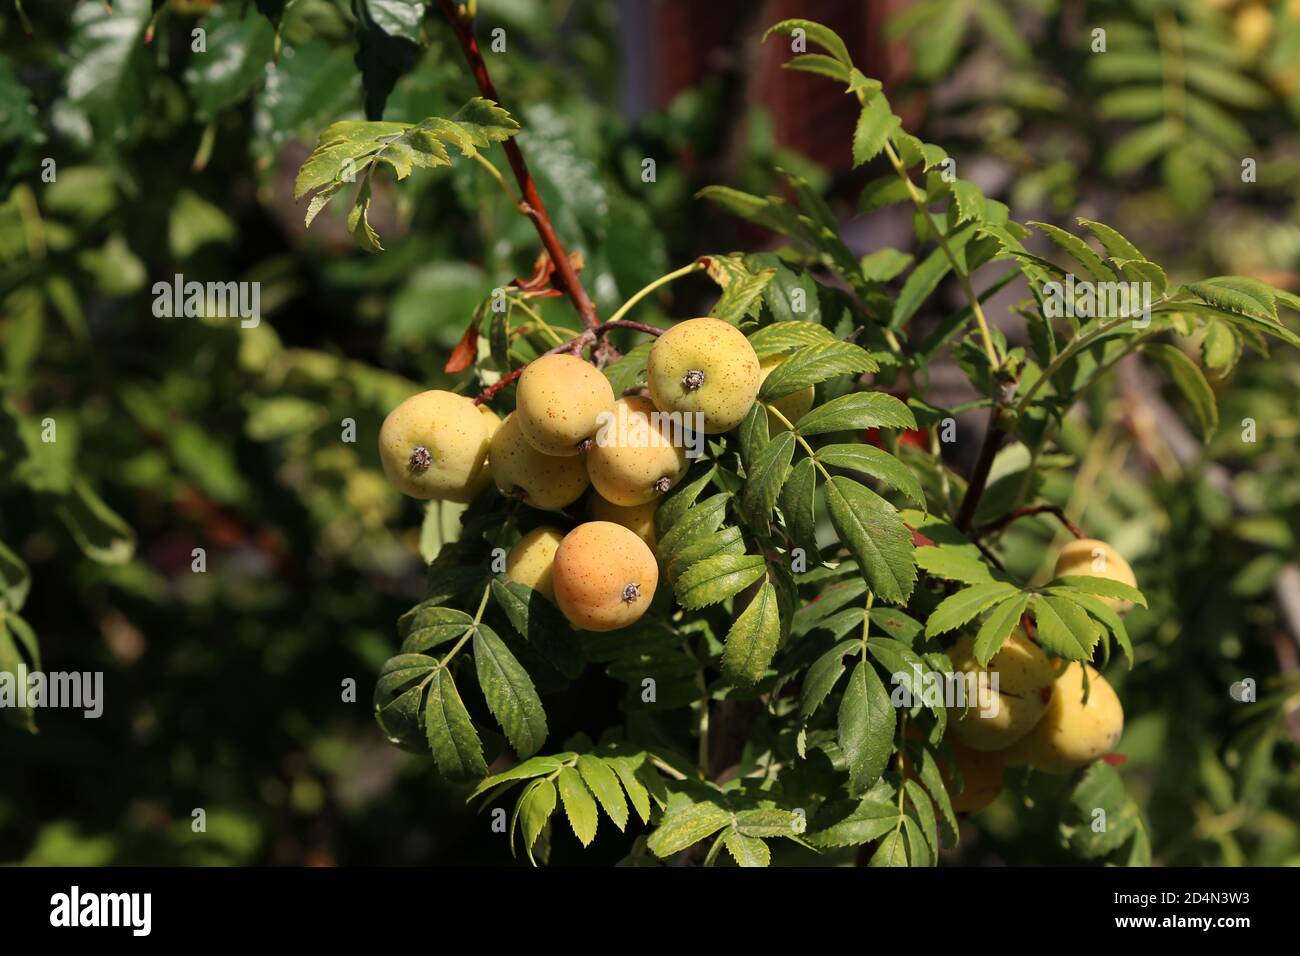 Fruits of the Sorbus domestica ripen on the branches of the tree Stock Photo